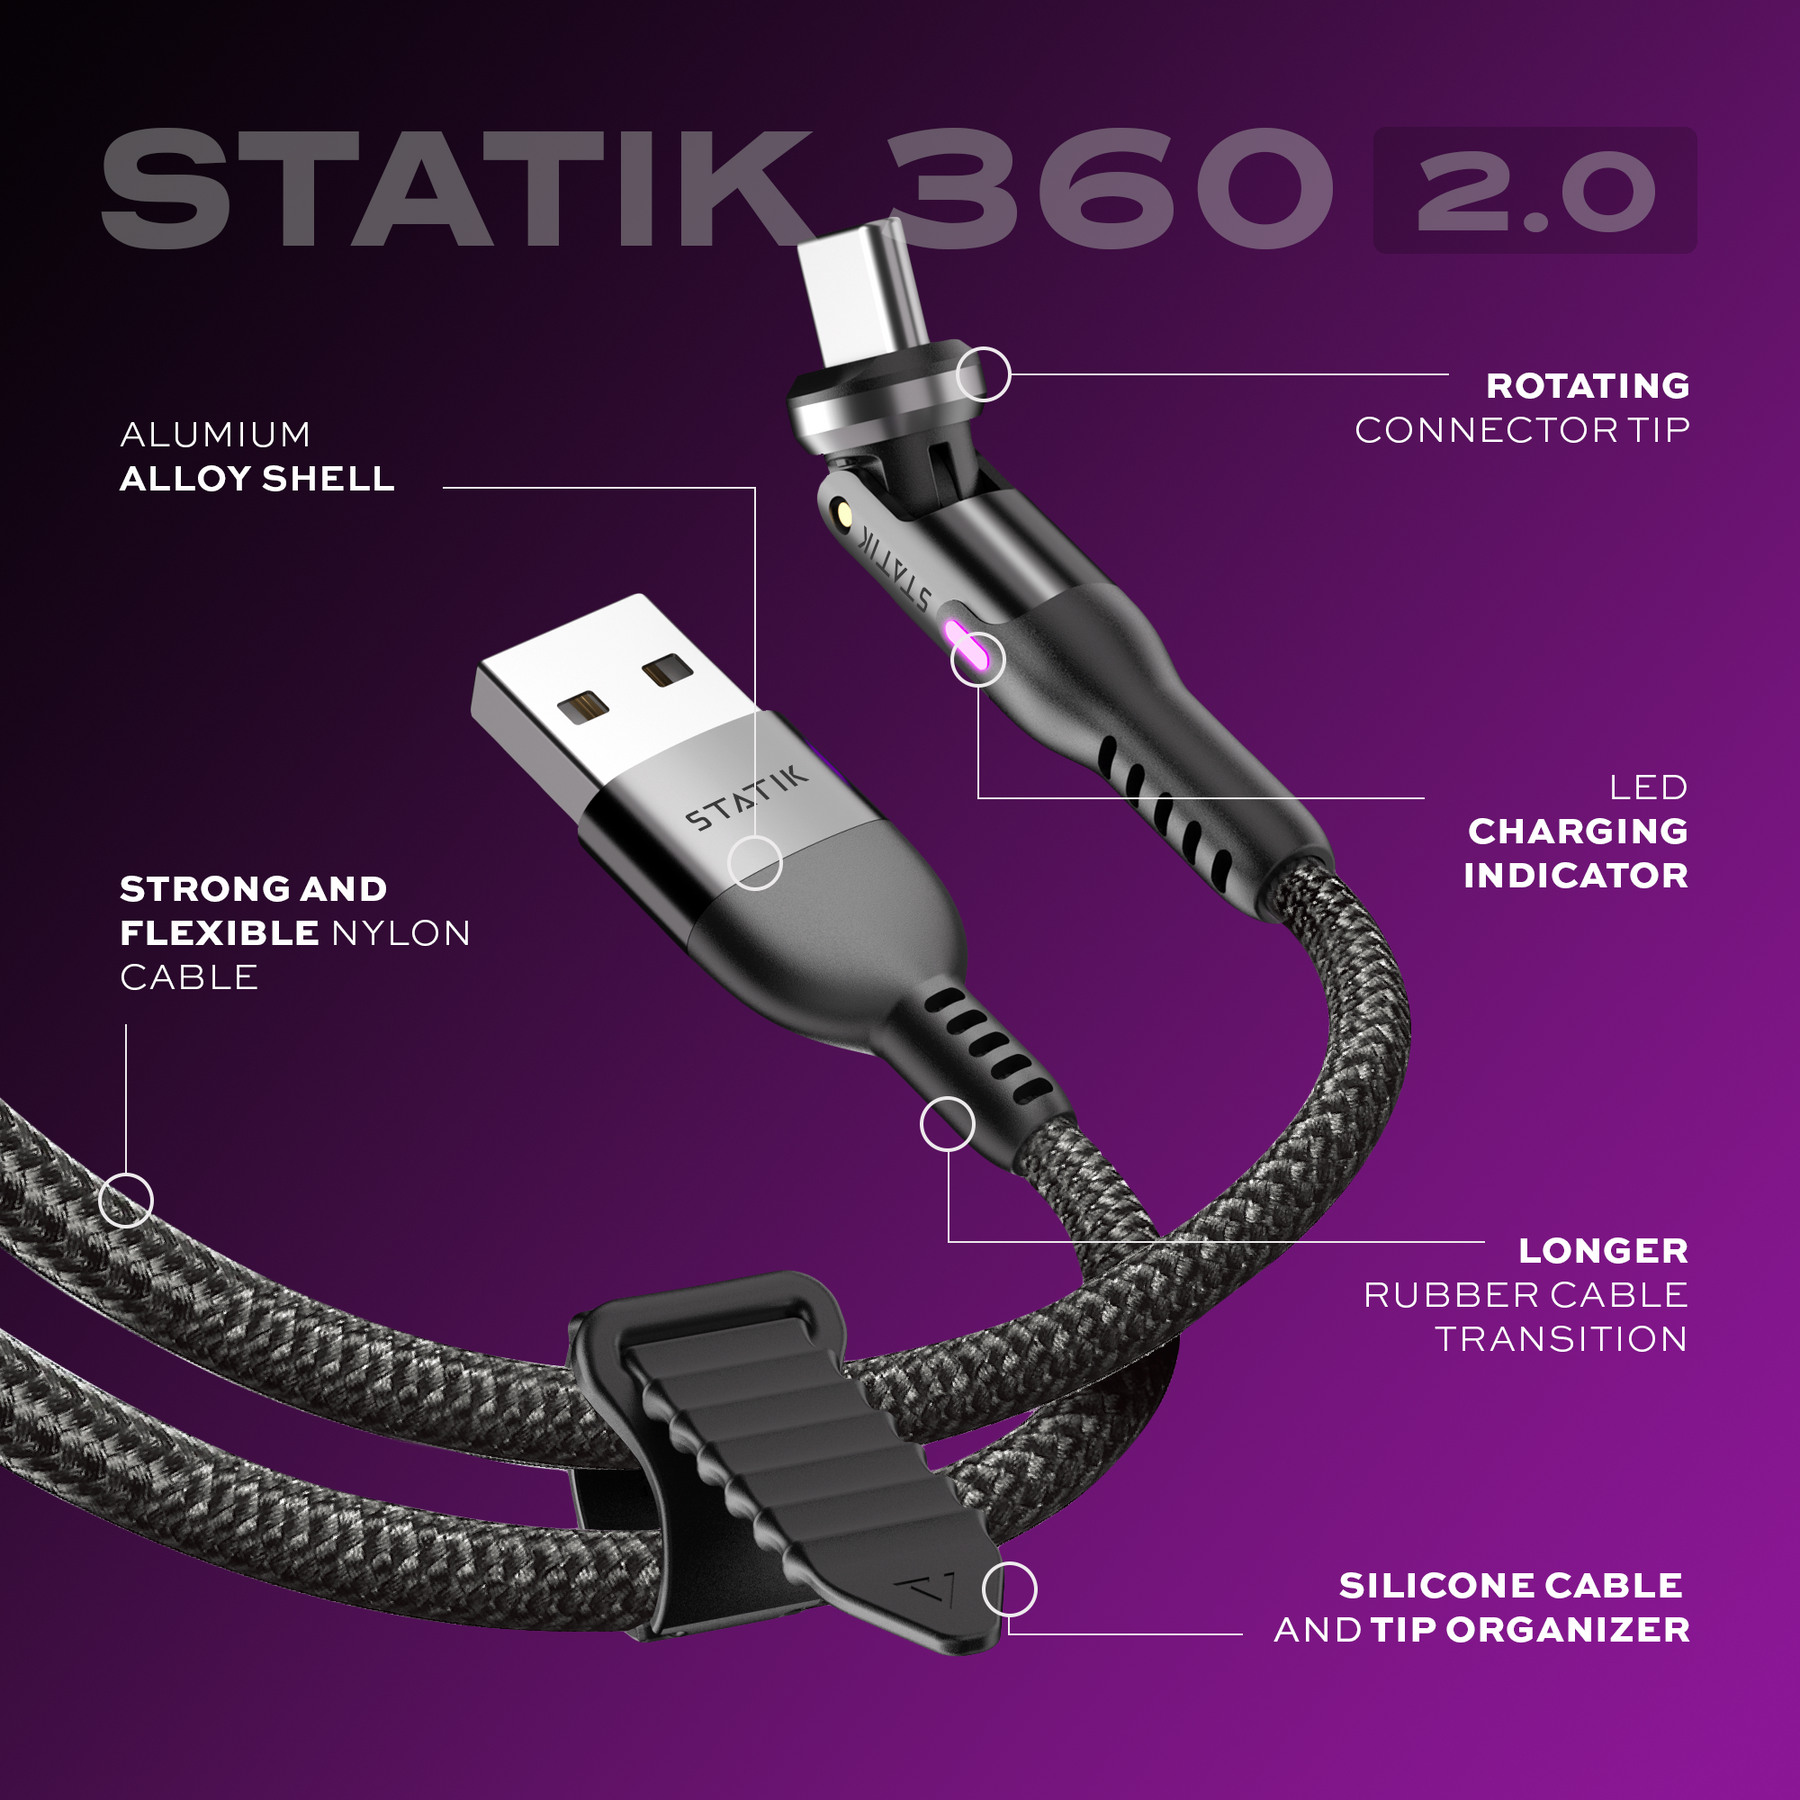 Statik 360 Cable Magnetic Tips Connecting on Vimeo